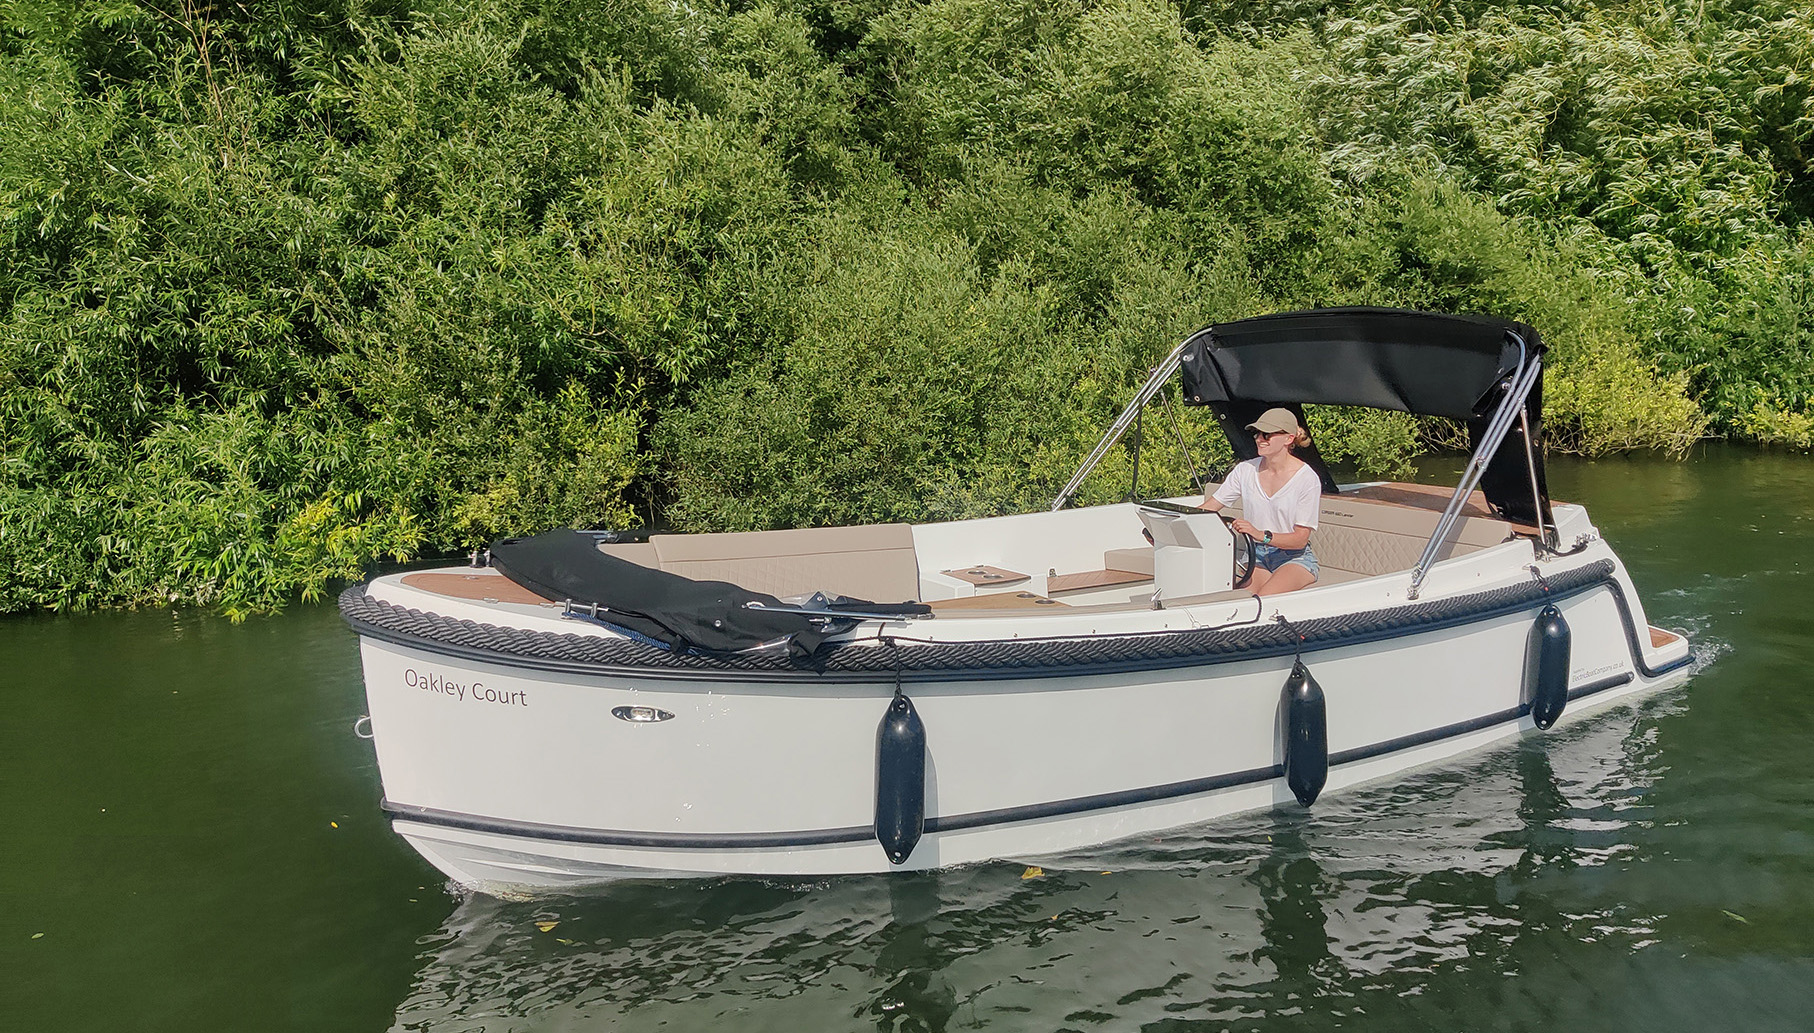 10 Seater Boat Hire in Berkshire